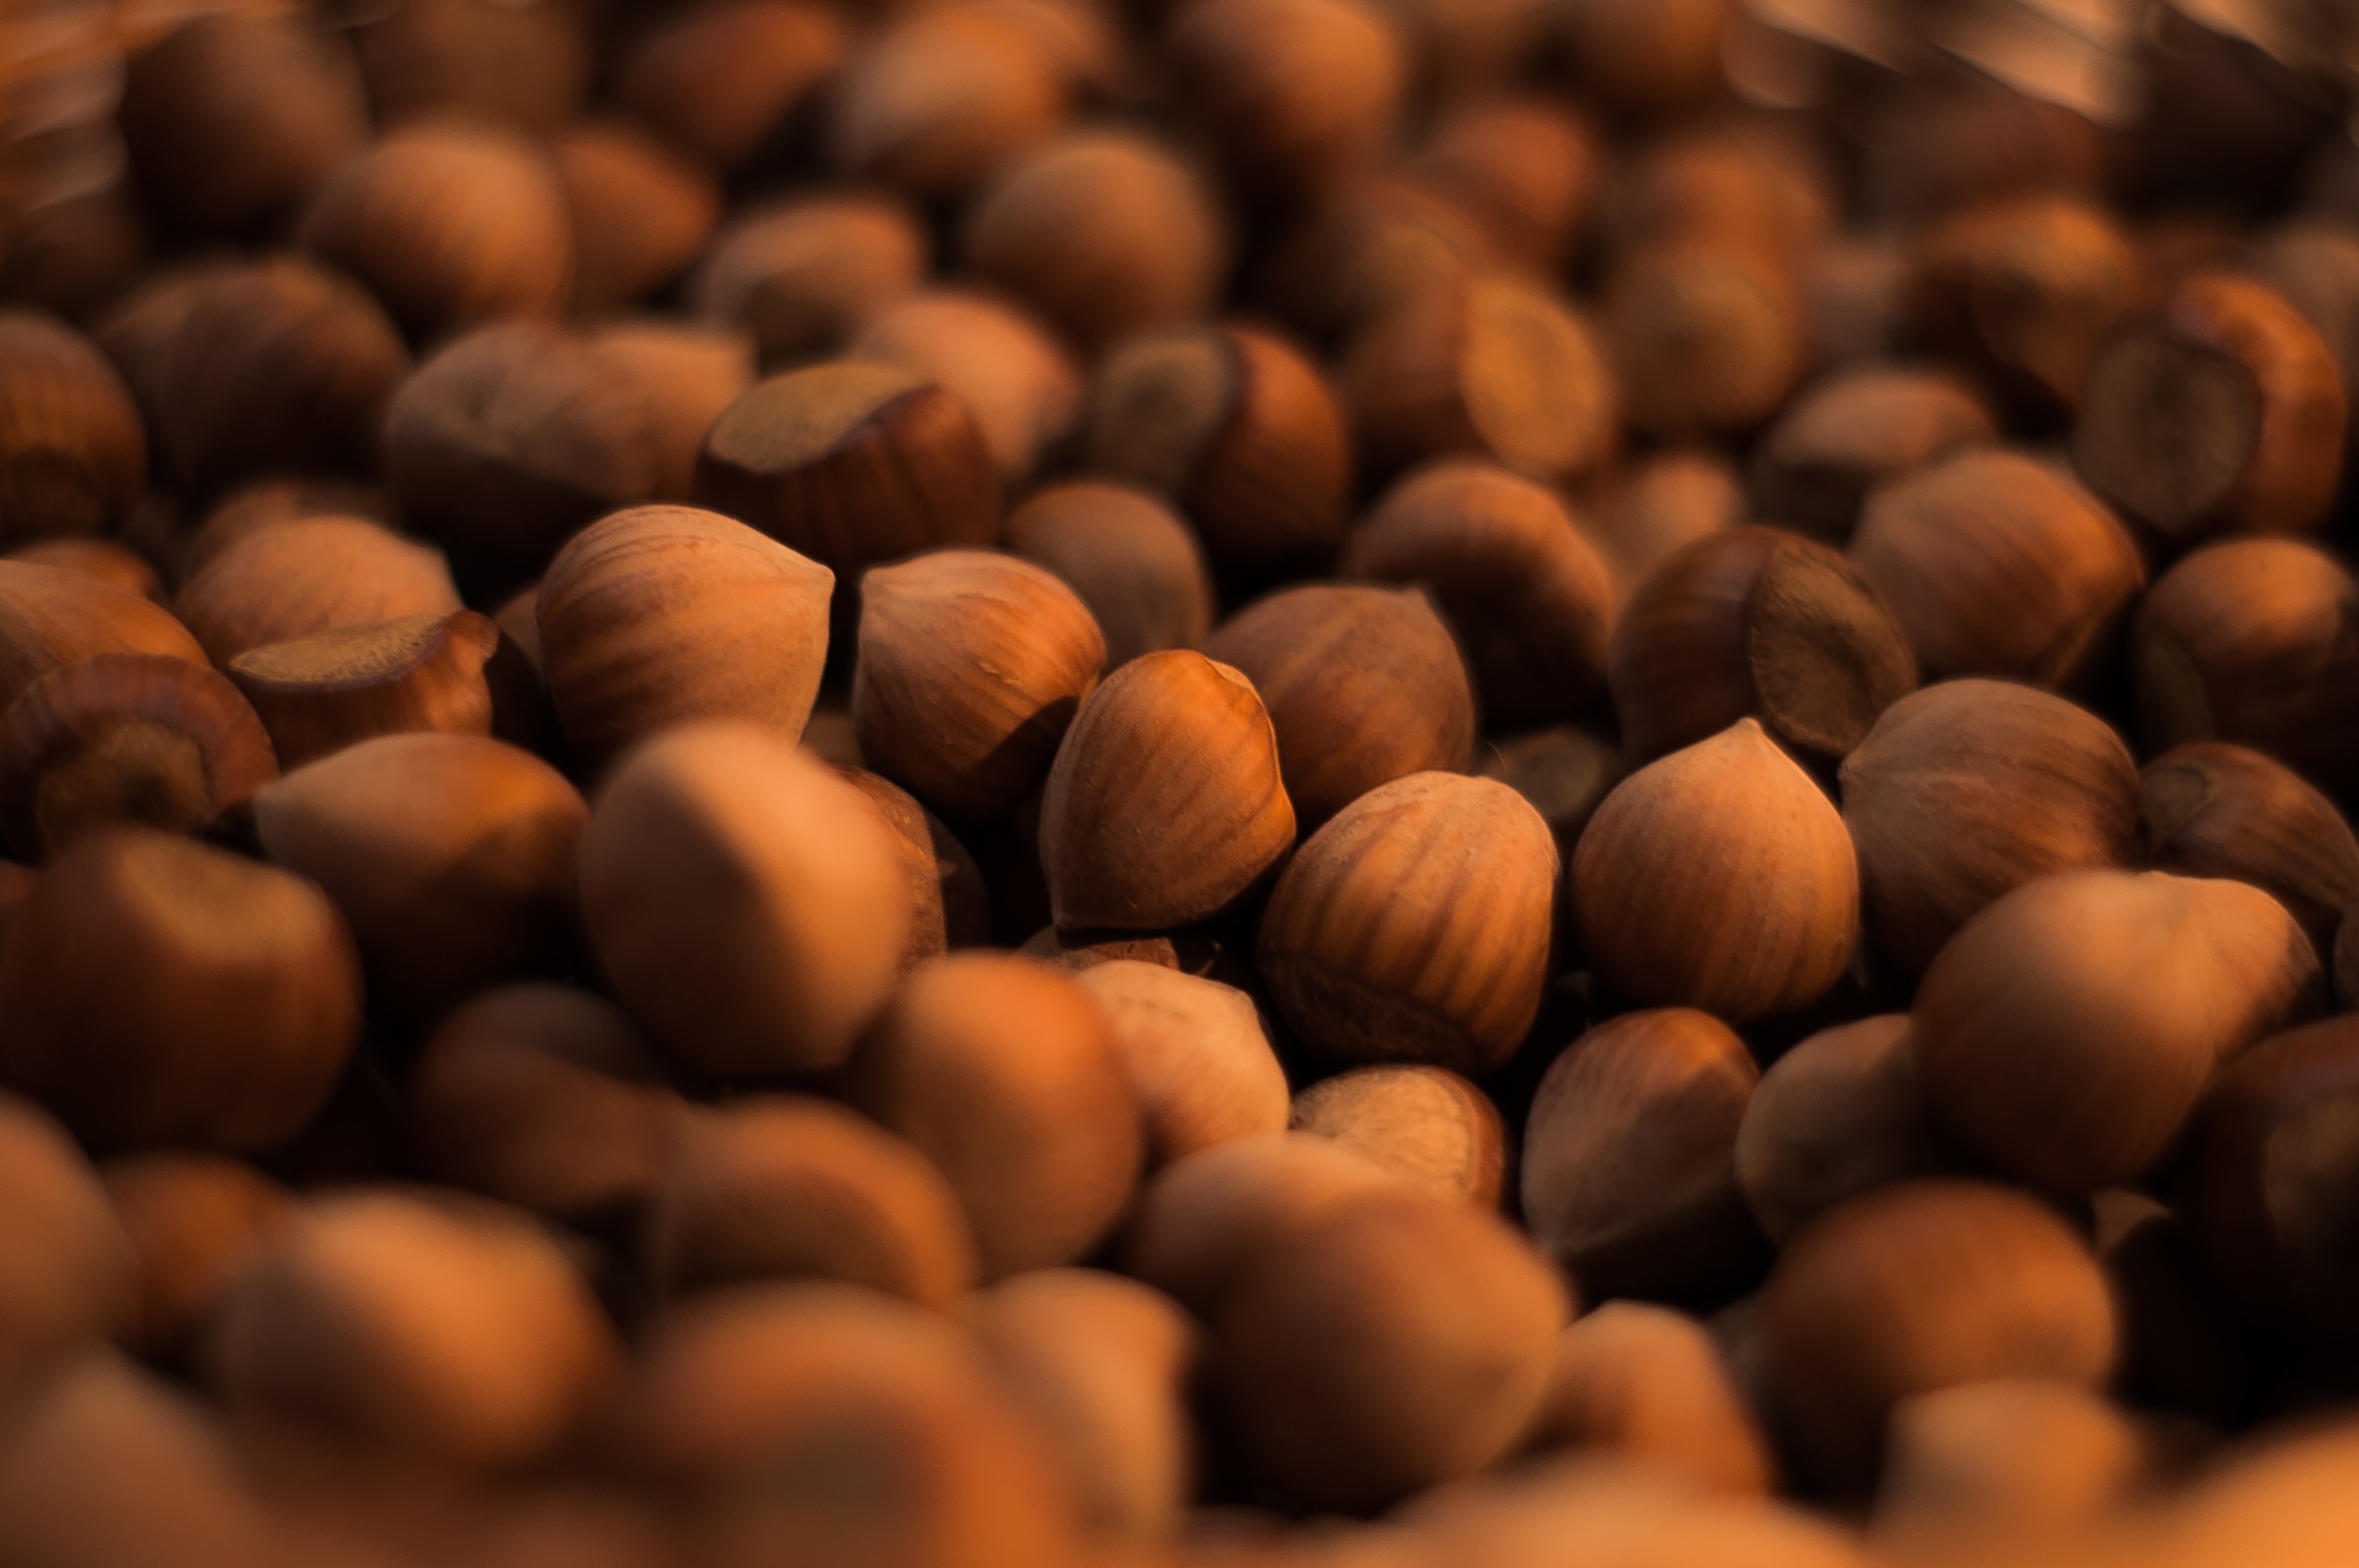 Hazelnuts: Harvested in late September or October after falling to the ground. 3010x2000 HD Wallpaper.